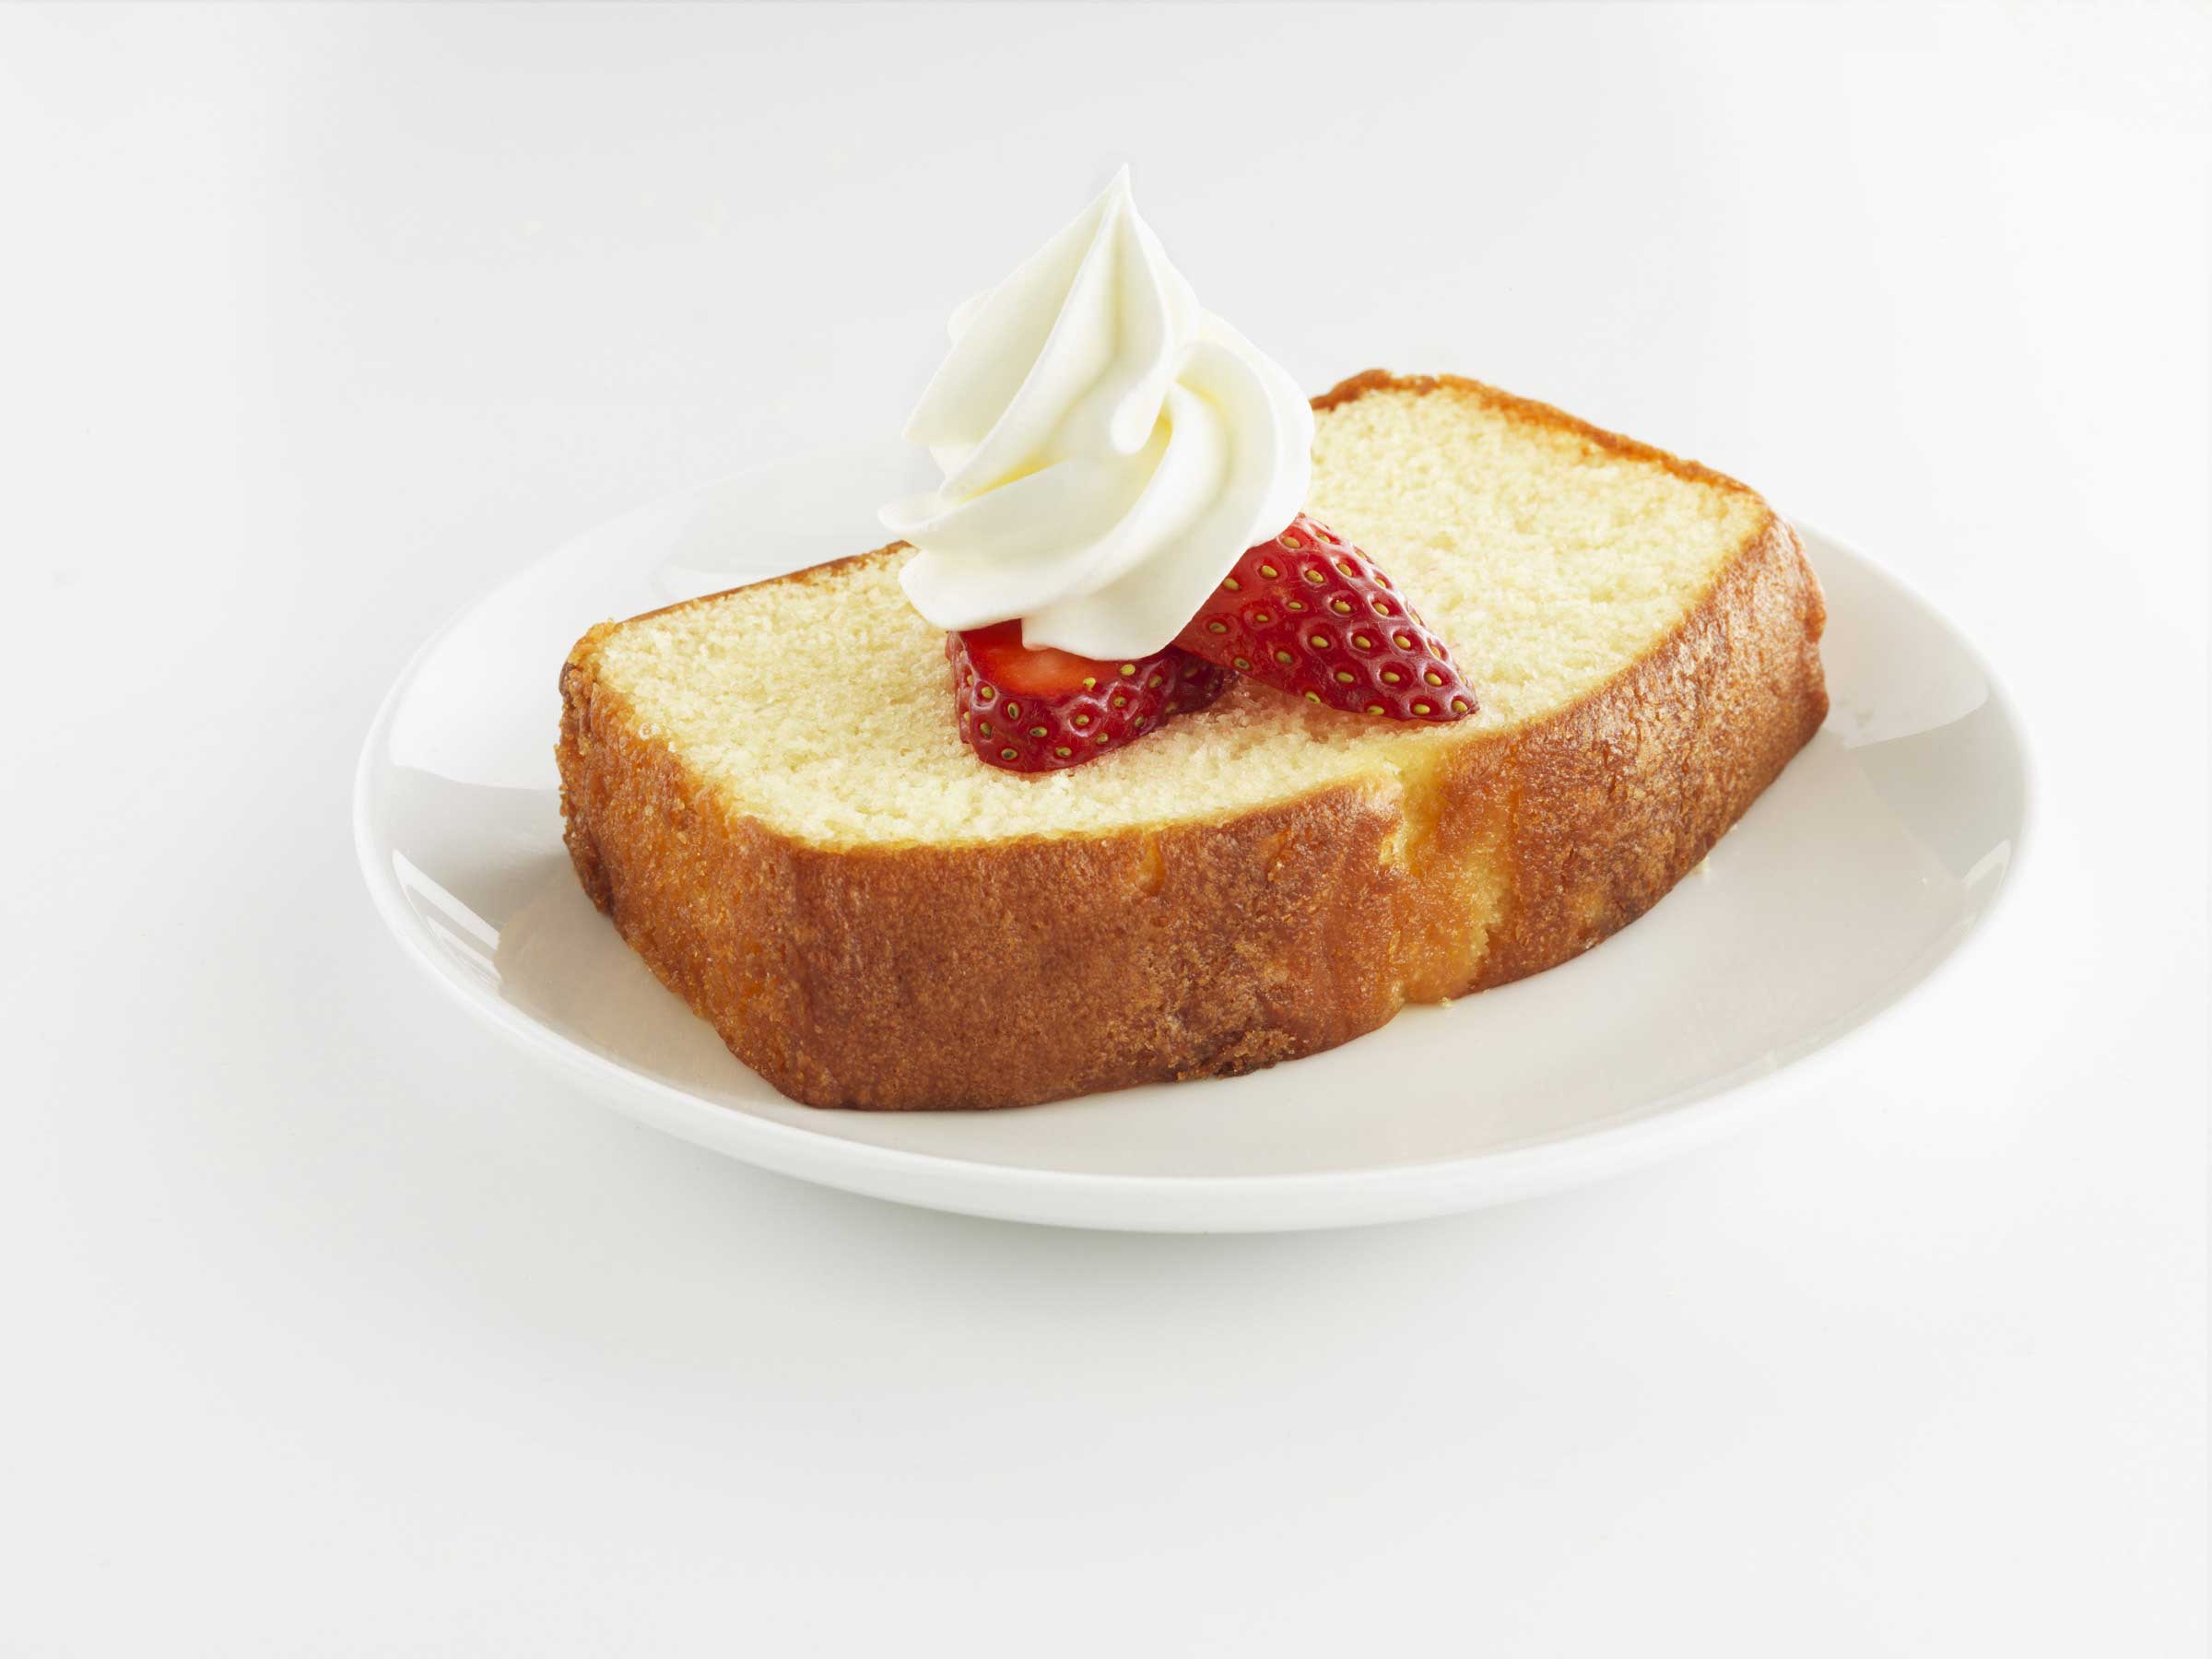 Sara Lee Makes Pound Cake Sound More Buttery Than It Is, Class